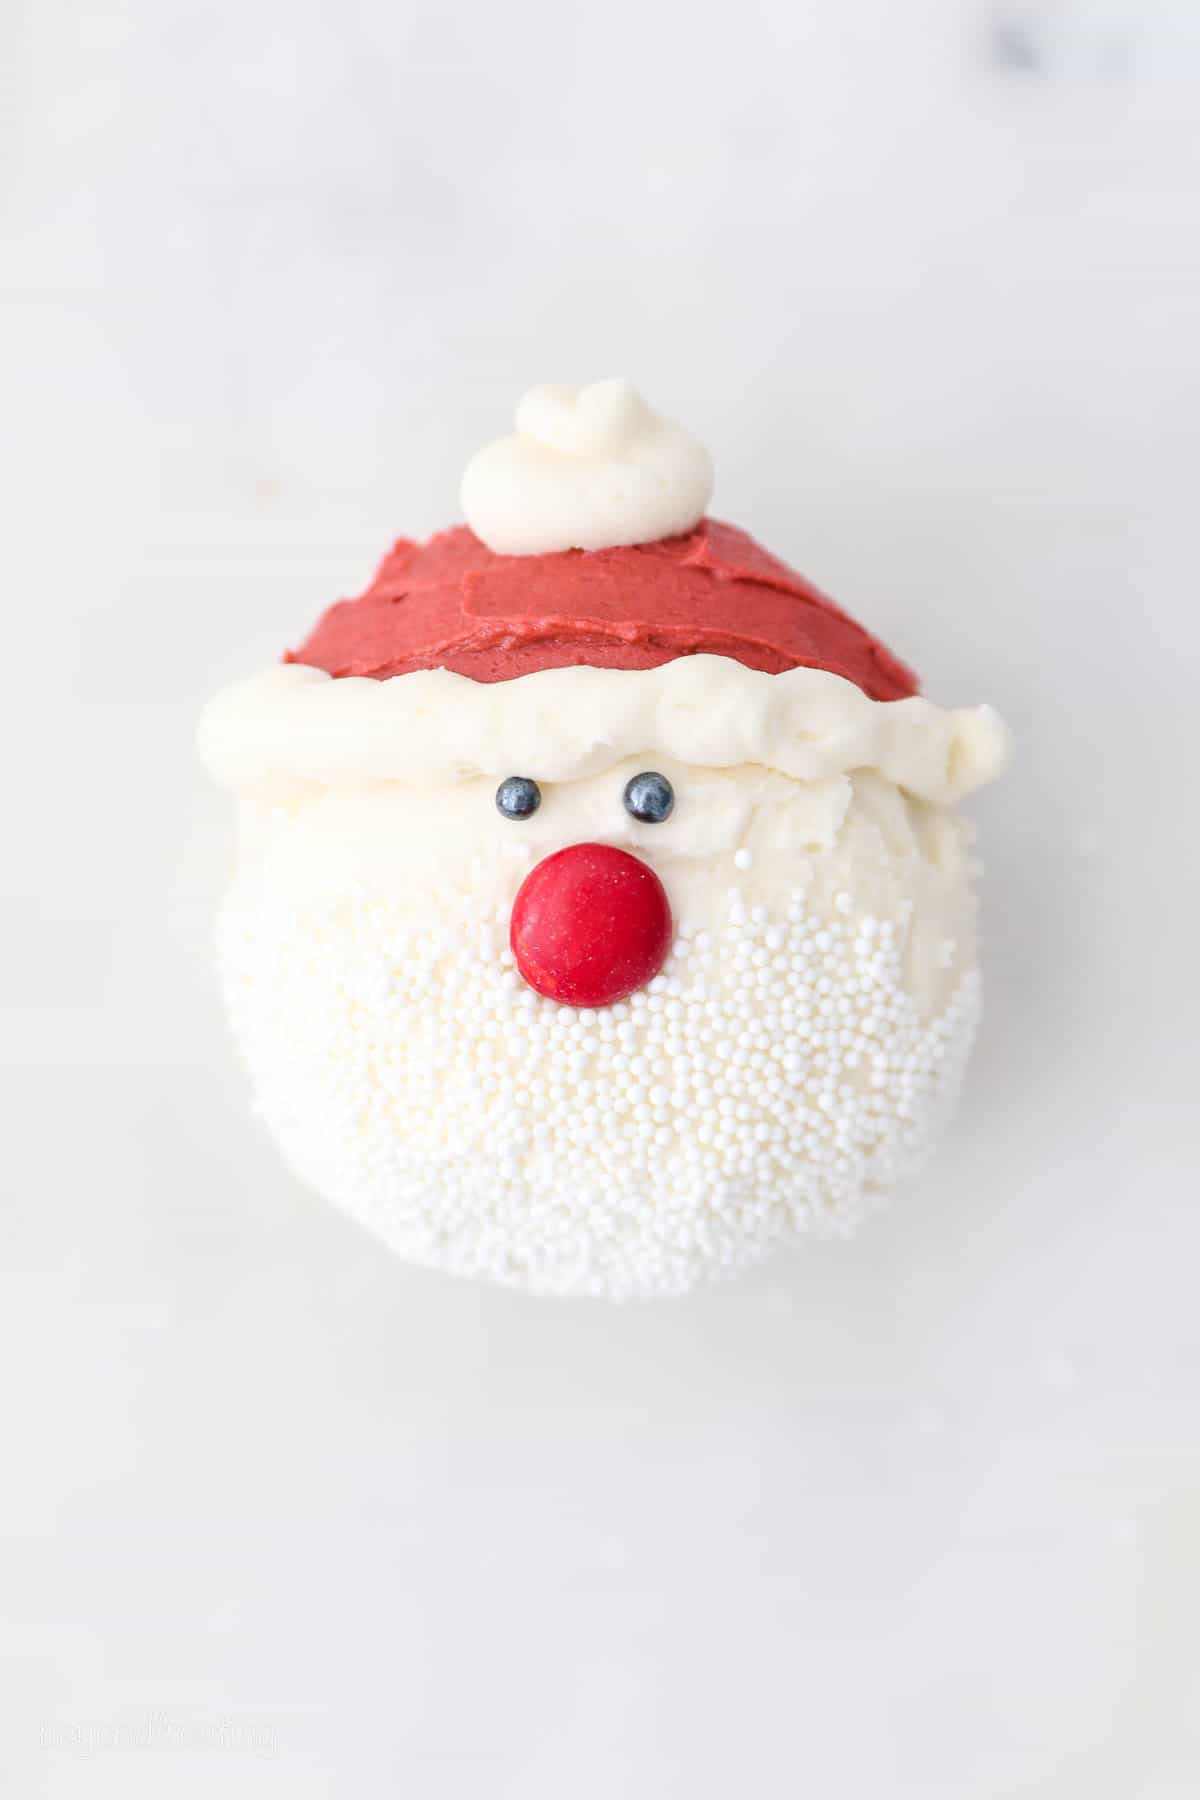 Overhead view of a cupcake frosted to look like Santa with a red buttercream hat and a sprinkle beard.